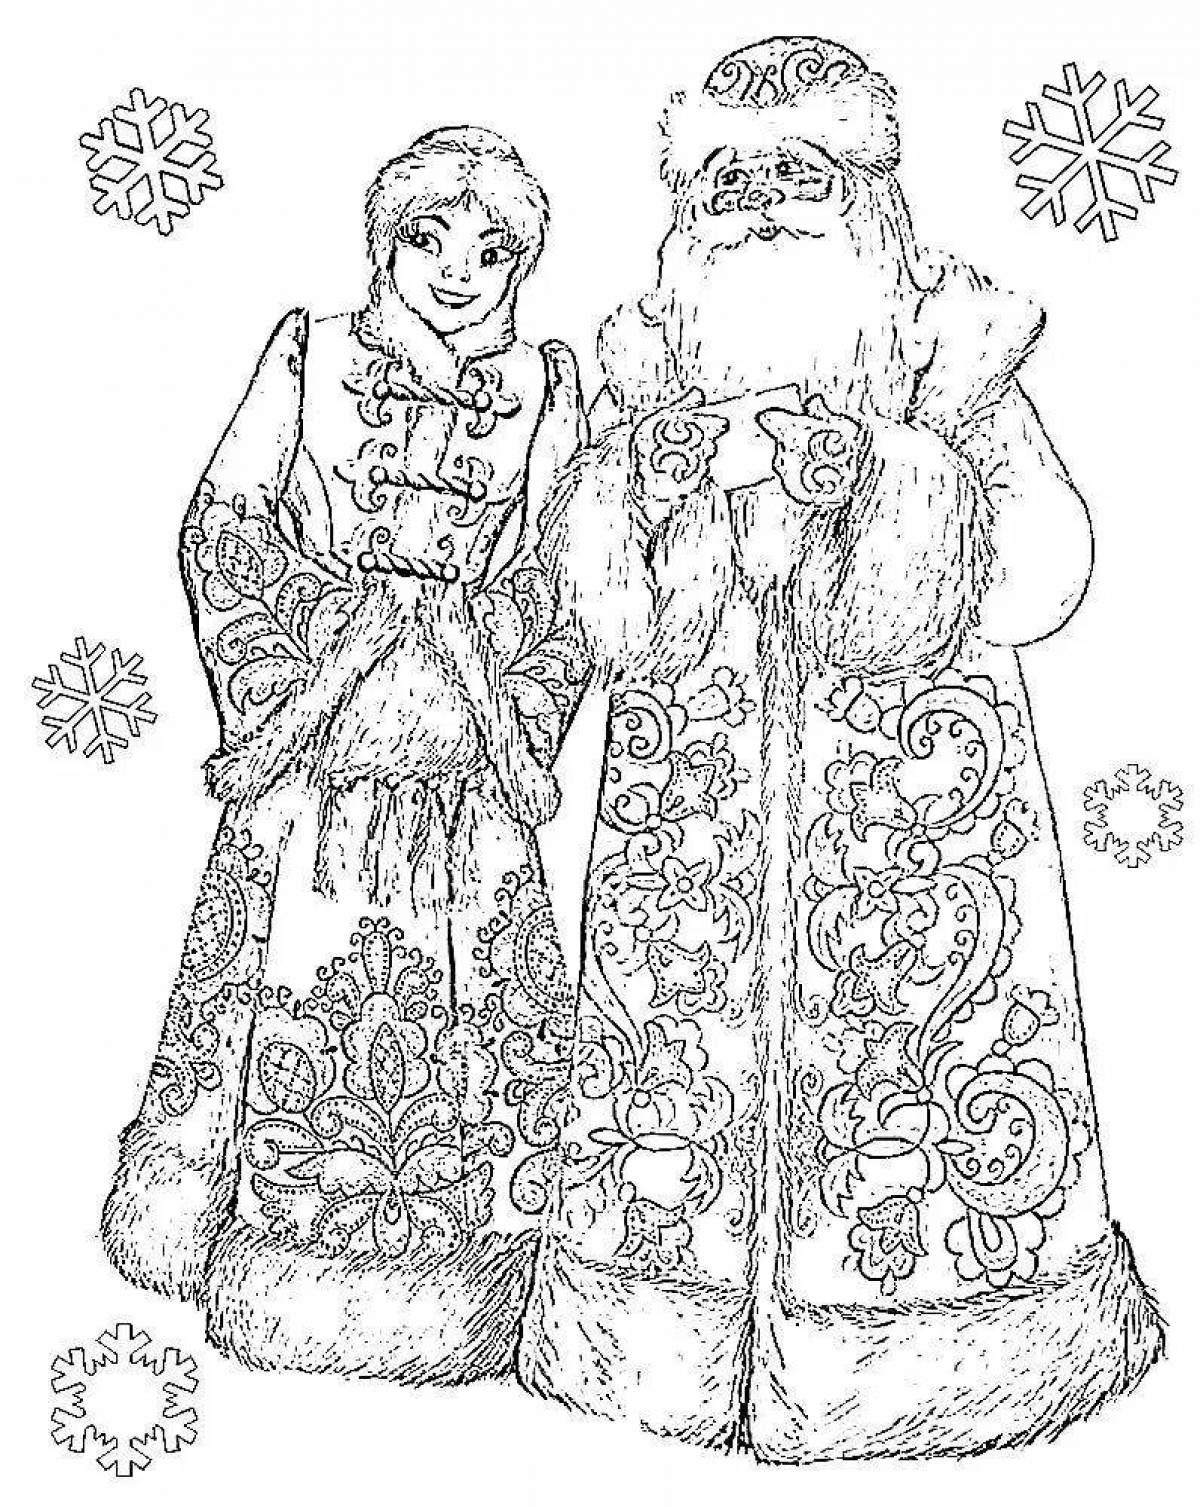 Merry Christmas Santa Claus and Snow Maiden